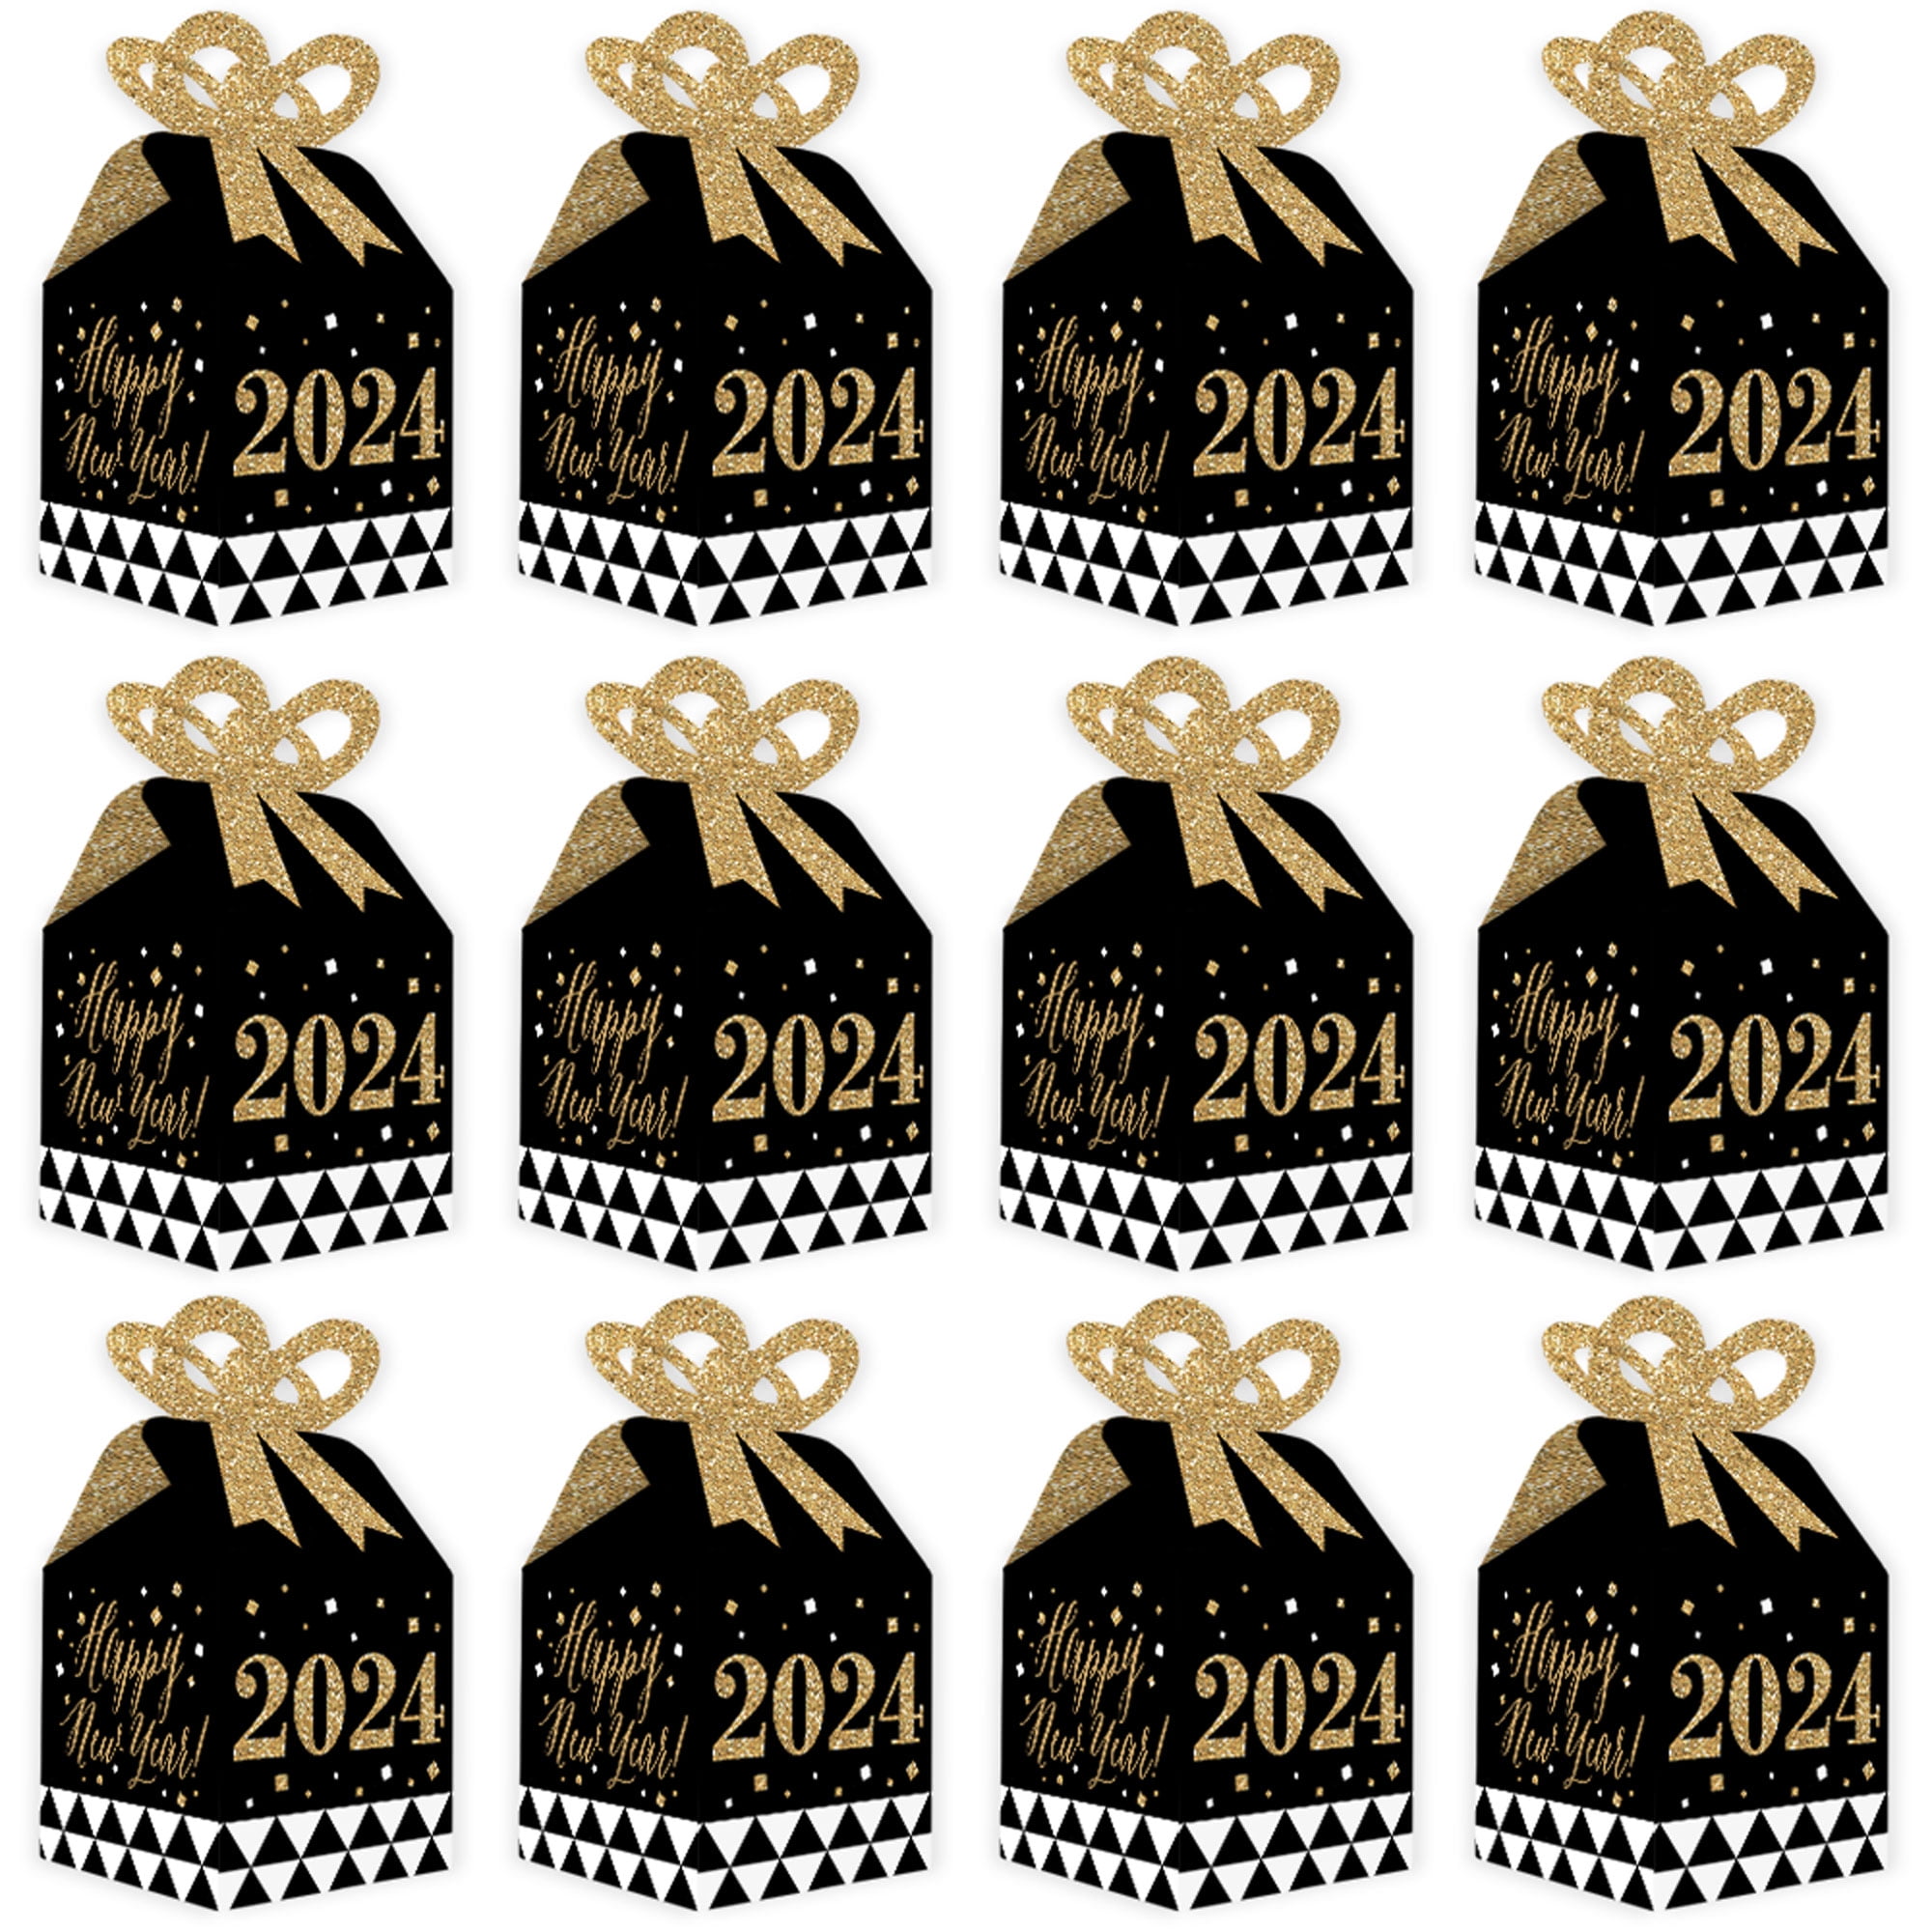 Big Dot of Happiness New Year’s Eve - Gold - New Years Eve Gift Favor Bags  - Party Goodie Boxes - Set of 12